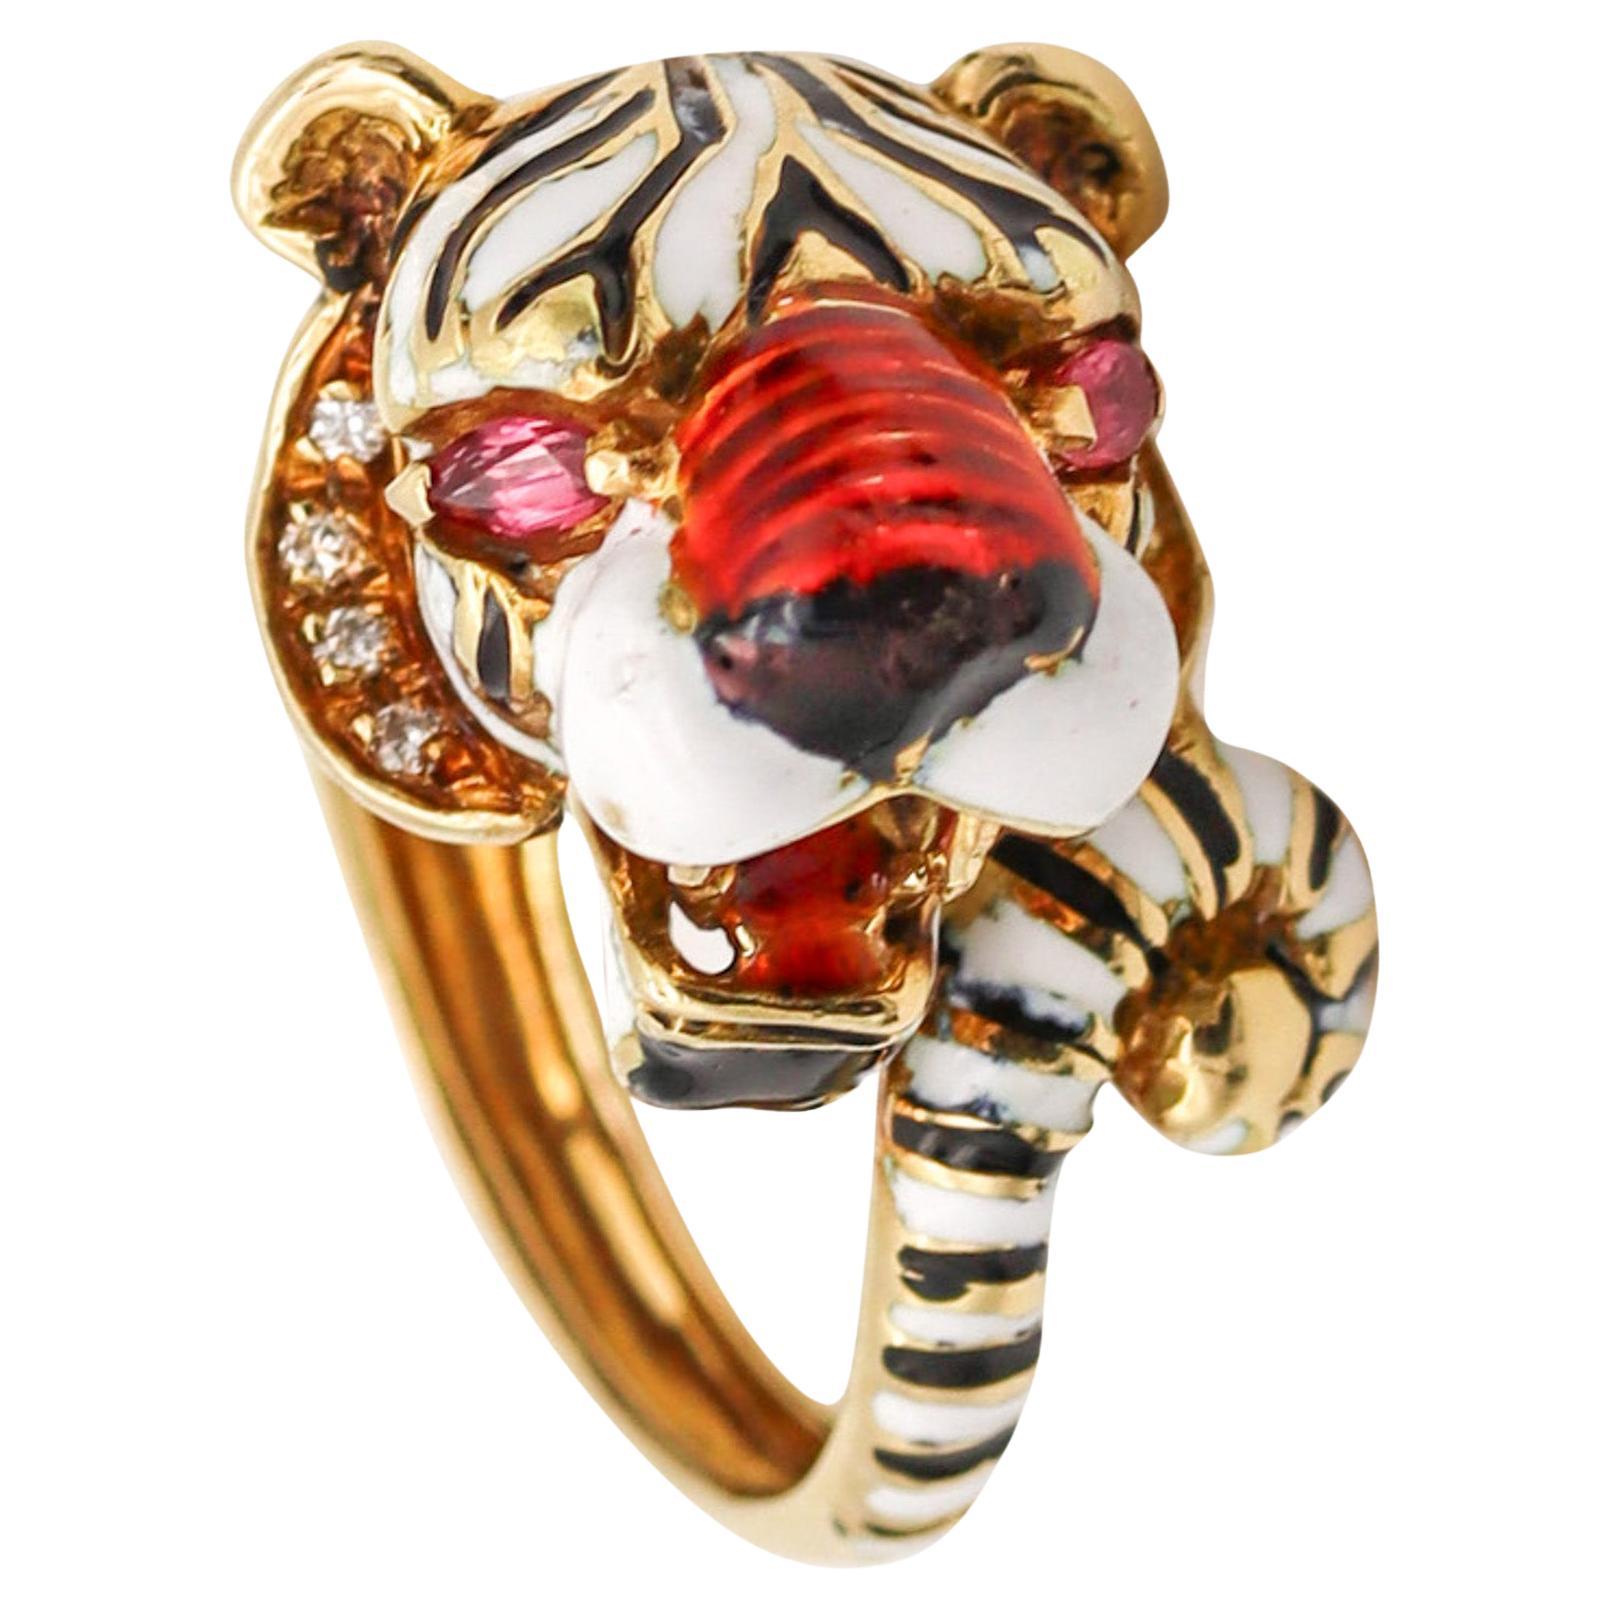 Frascarolo Milano Enameled Tiger Cocktail Ring in 18Kt Gold Diamonds And Rubies